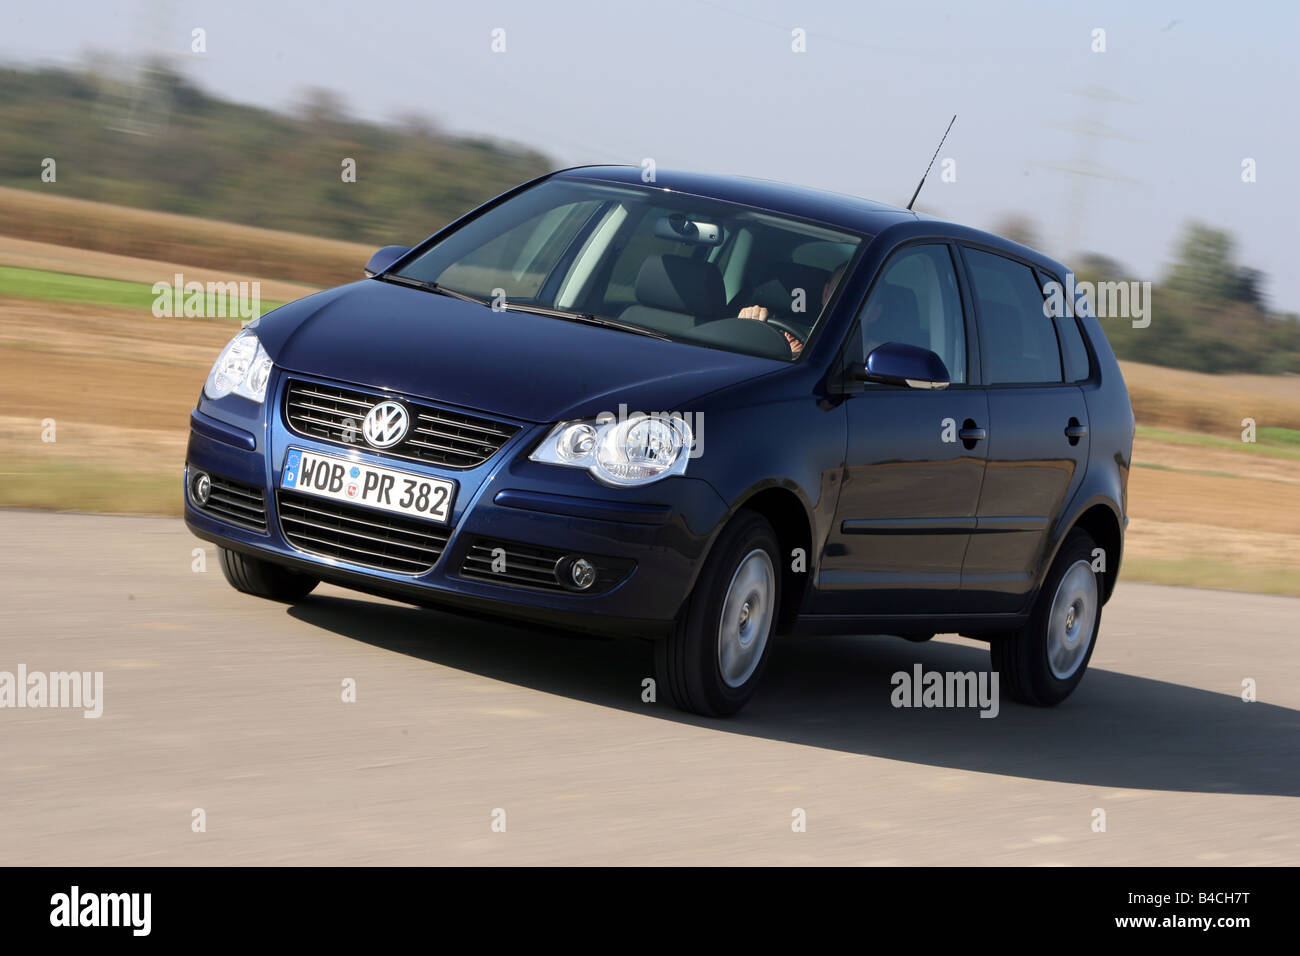 VW Volkswagen Polo 1.4 TDI, model year 2005-, dunkelblue moving, diagonal  from the front, frontal view, country road Stock Photo - Alamy